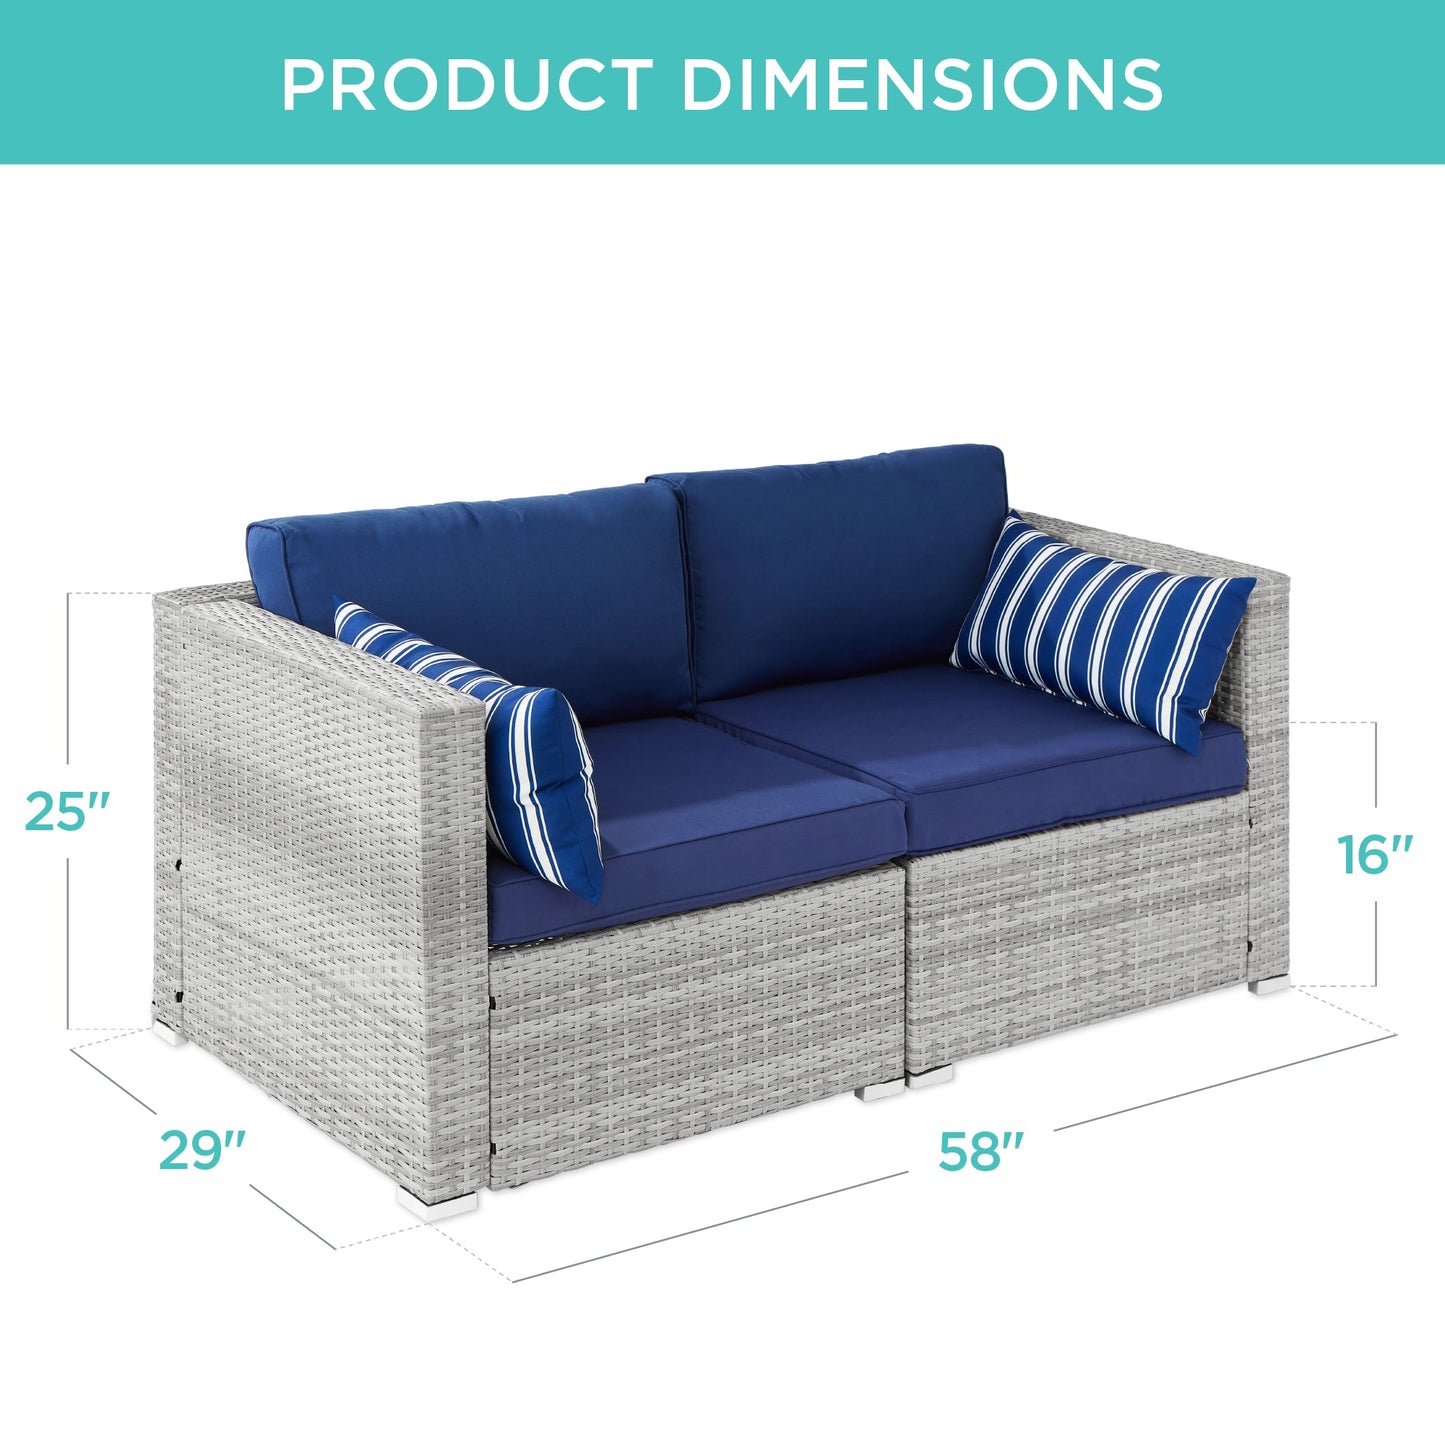 2-Person Outdoor Patio Loveseat Sofa Couch w/ 2 Accent Pillows